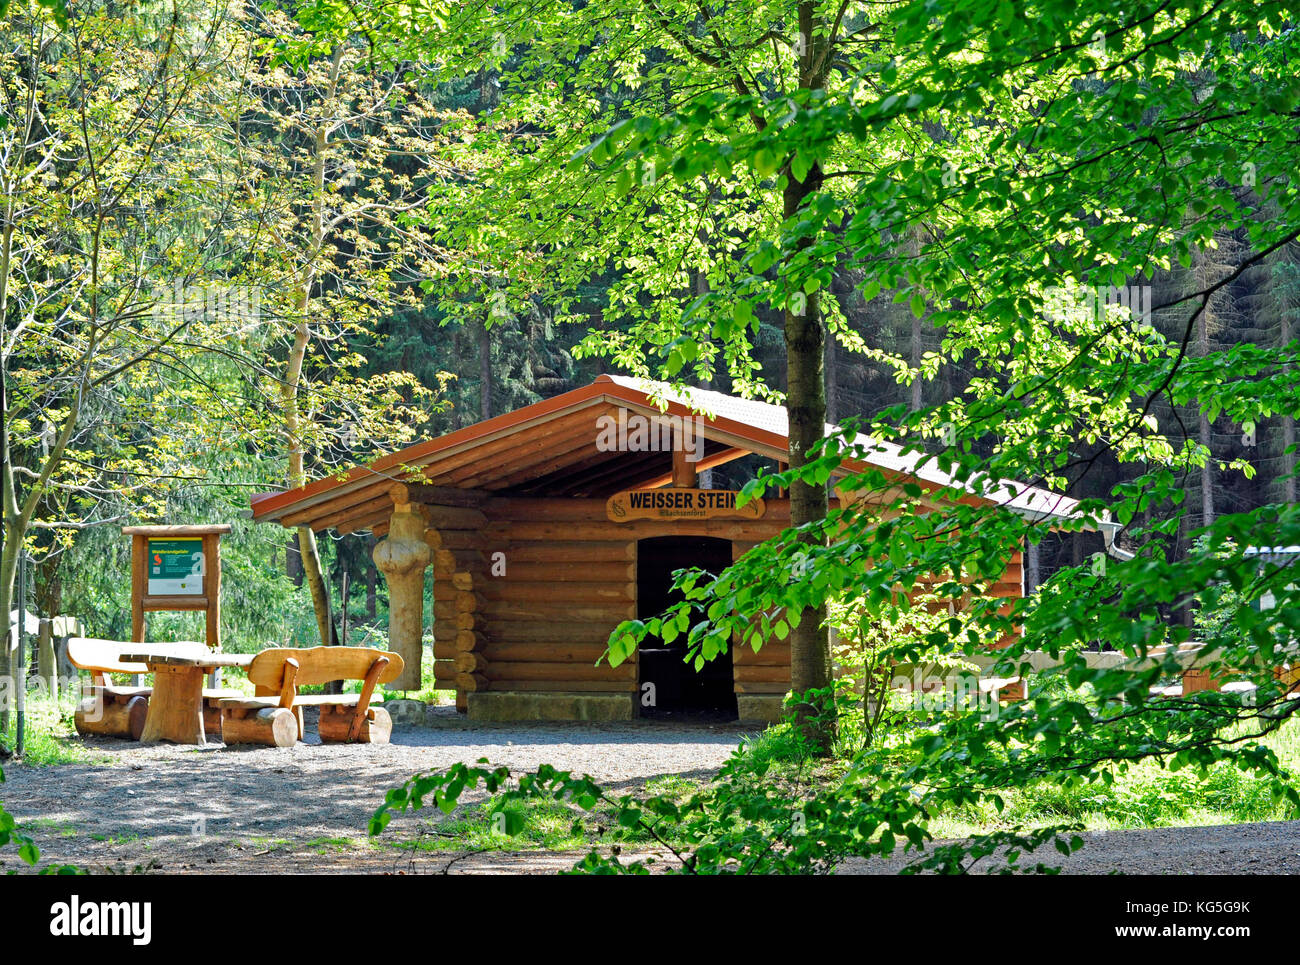 Accomodation hut in the resting place 'Weisser Stein' in the local recreation area Colditzer Wald in the forest area Leipzig Stock Photo